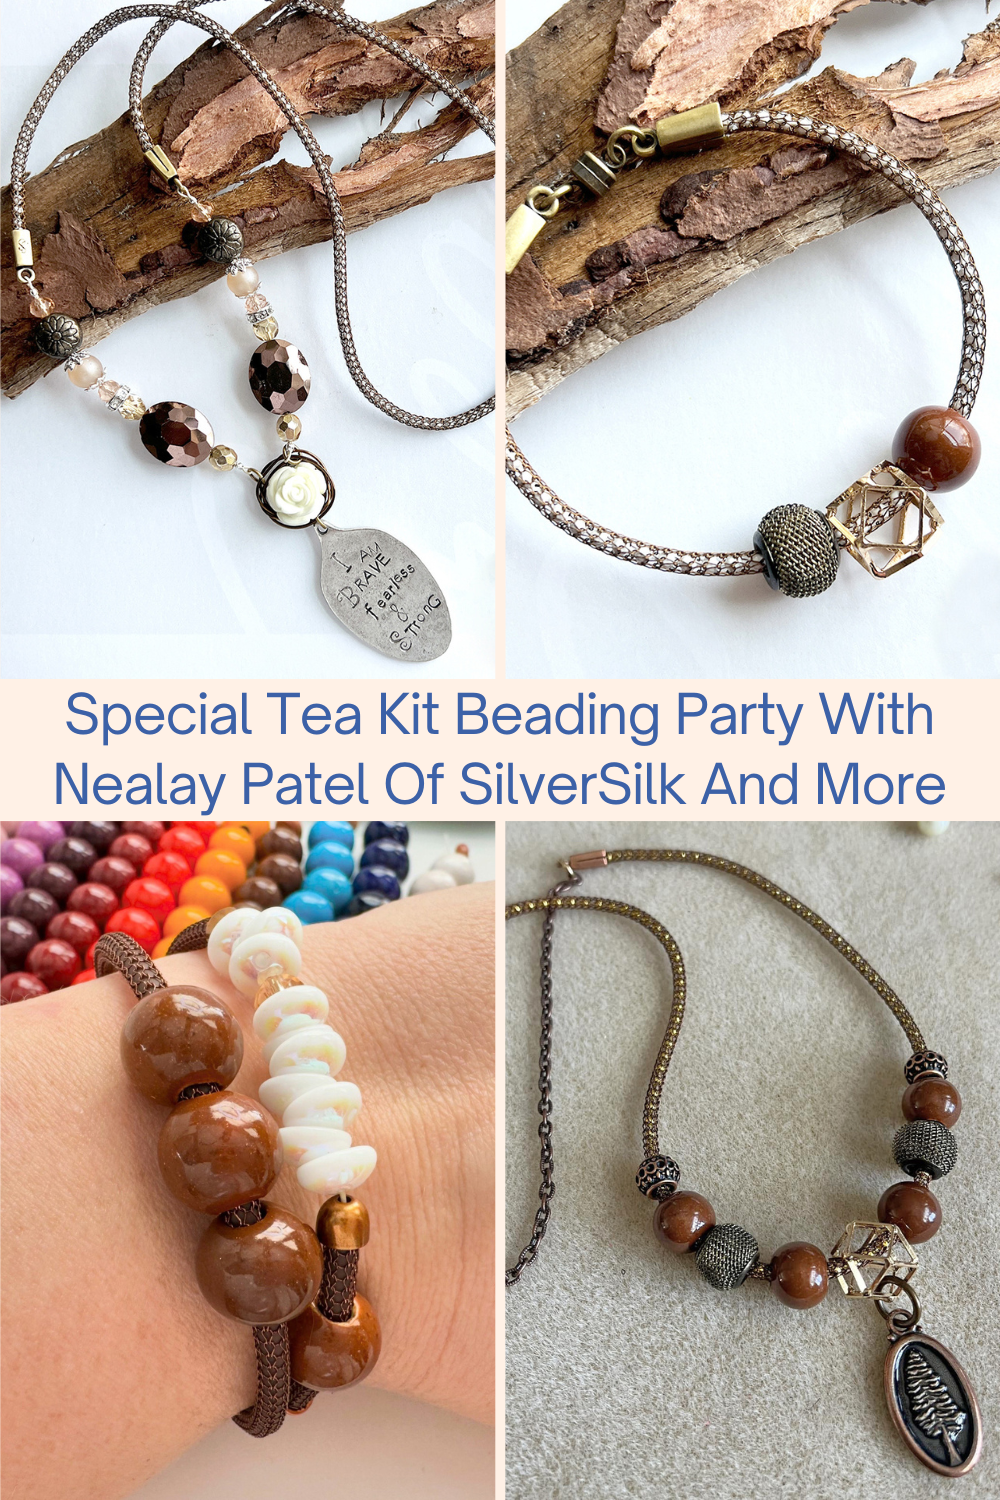 Special Tea Kit Beading Party With Nealay Patel Of SilverSilk And More Collage